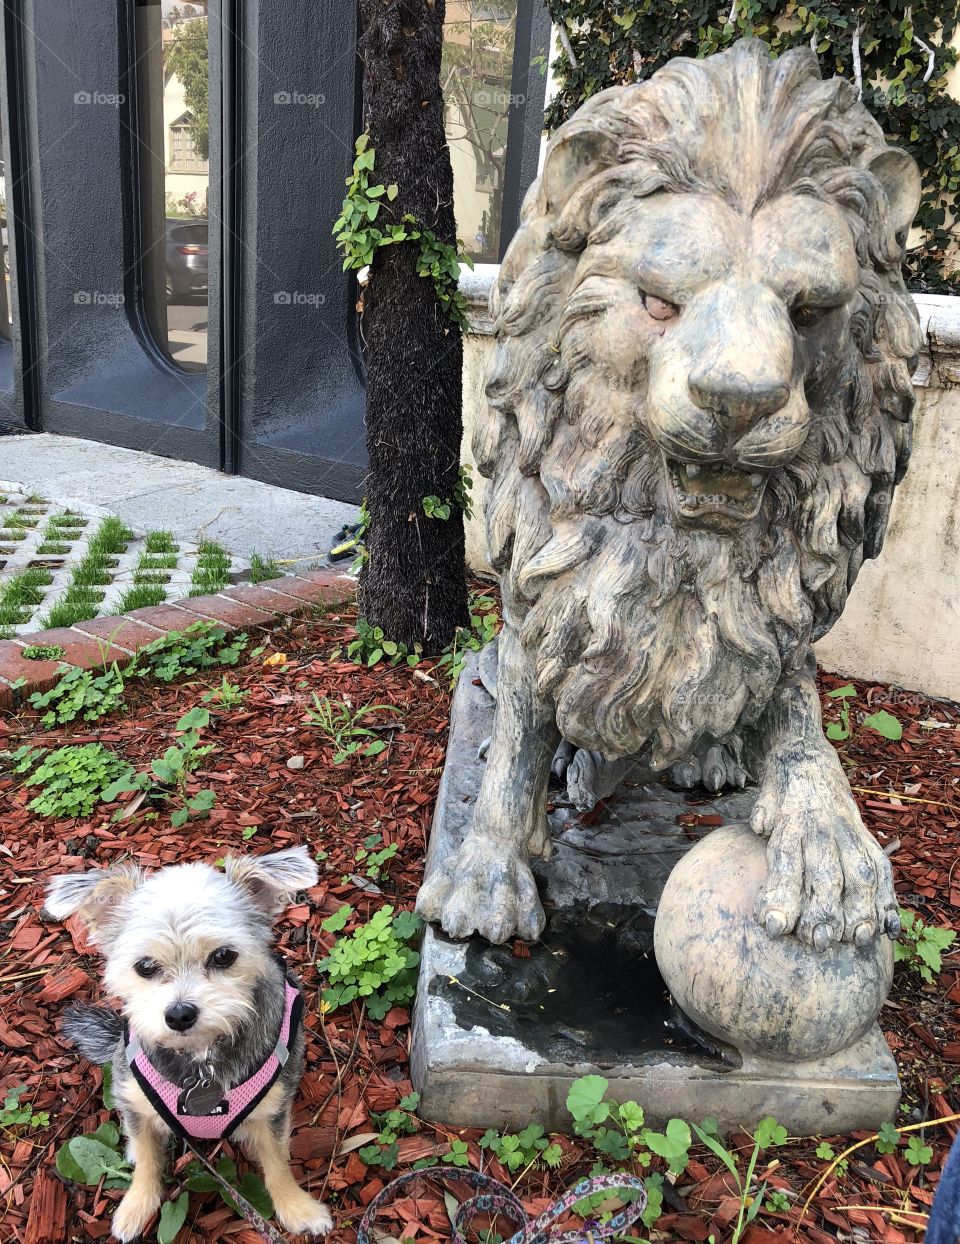 Yorkie and lion